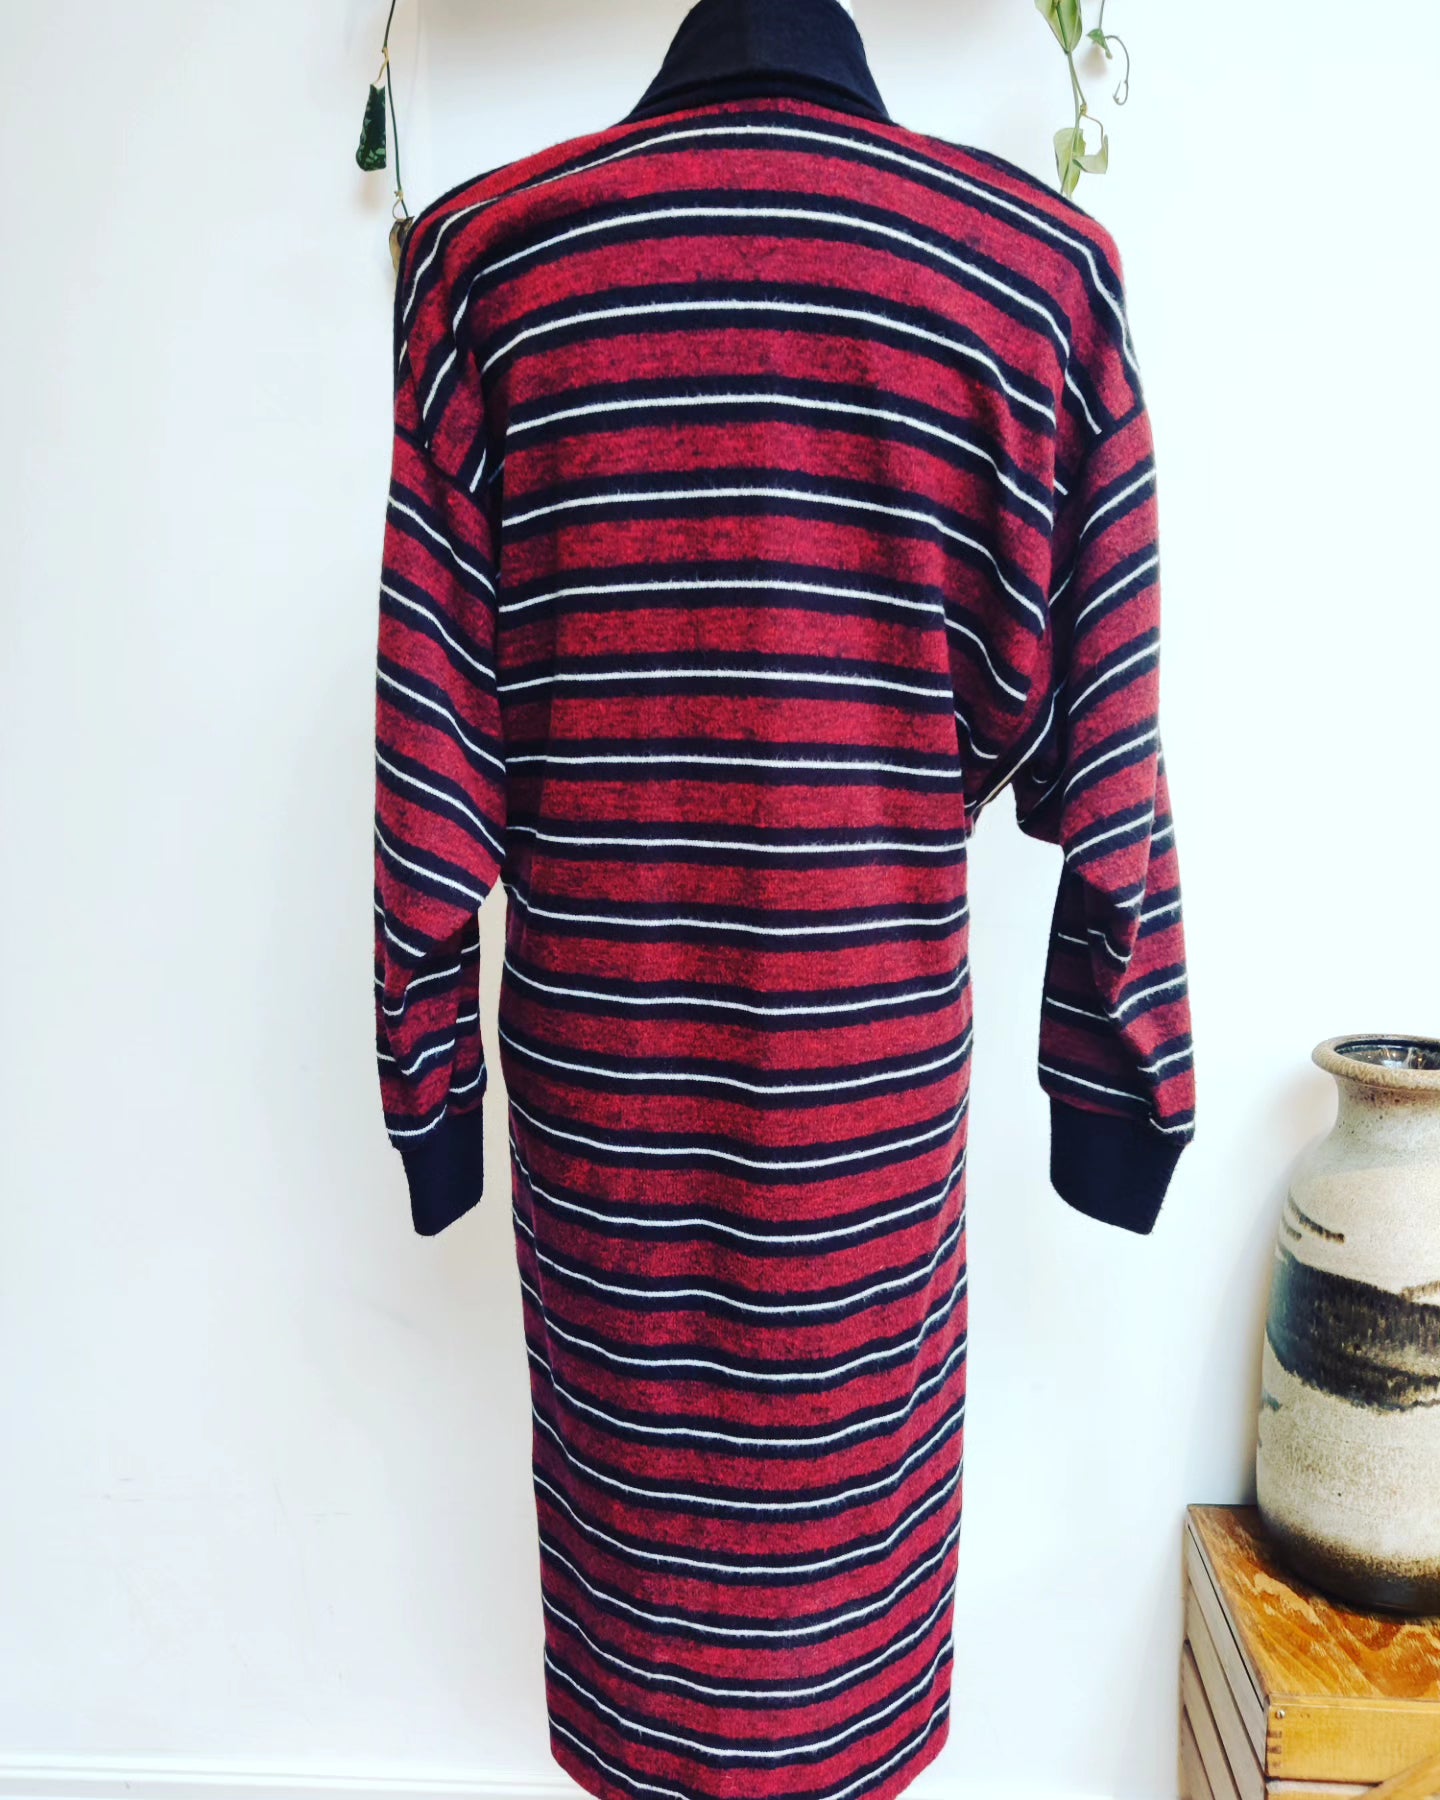 80s striped dress for sale